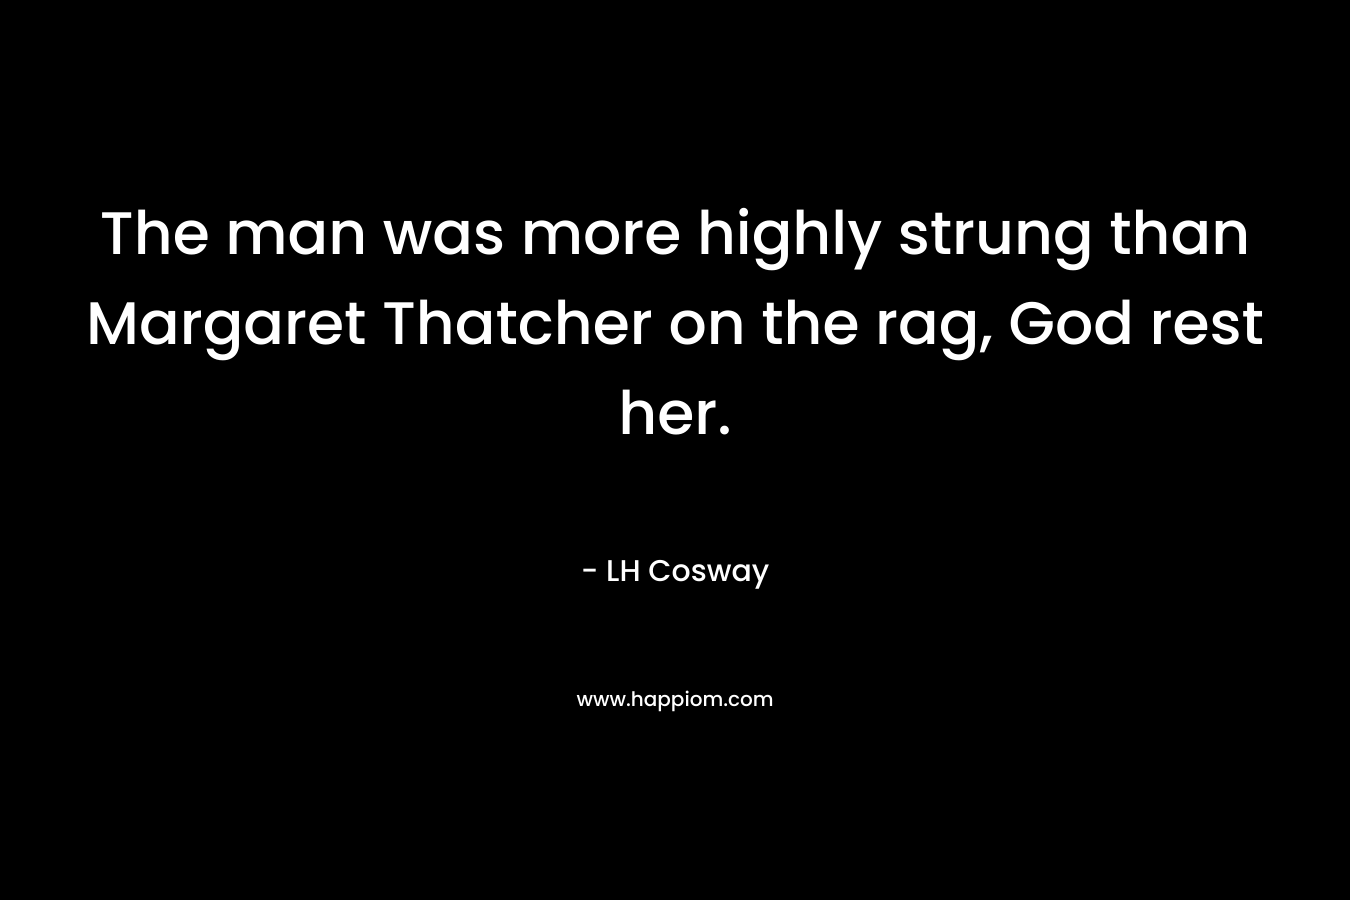 The man was more highly strung than Margaret Thatcher on the rag, God rest her. – LH Cosway